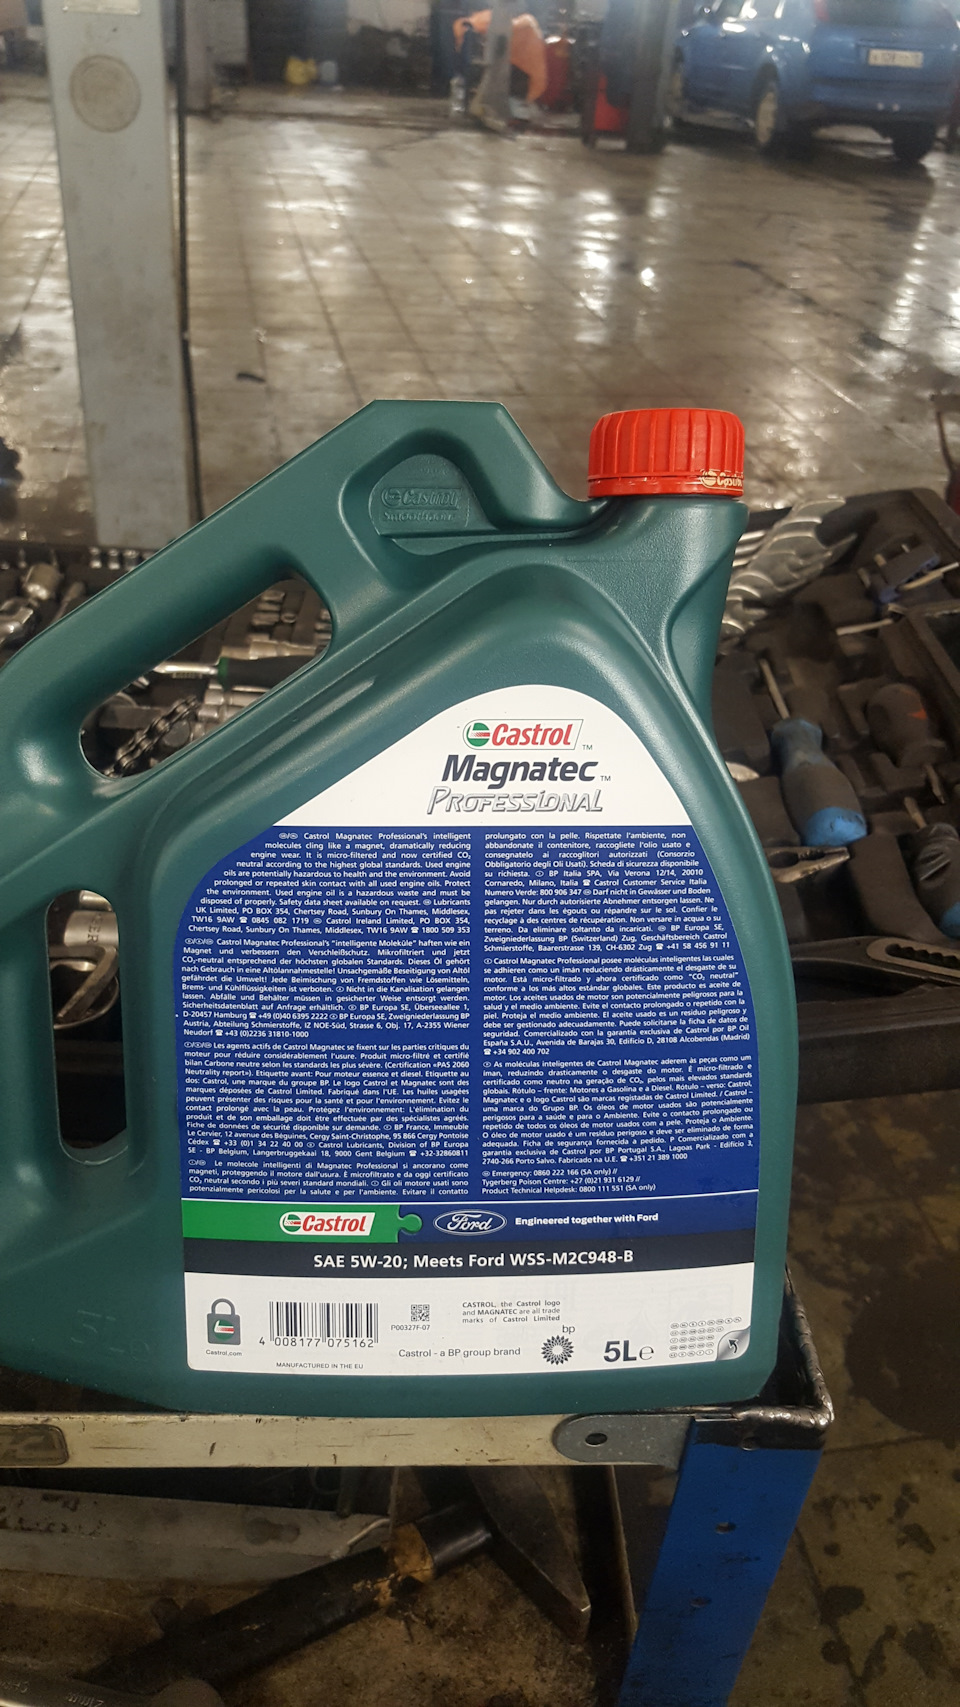 Масло ford ecoboost. 5w20 Ford Castrol ECOBOOST. Ford 5w20. Масло Форд 5w20. Кастрол магнатек для Форд фокус 3.